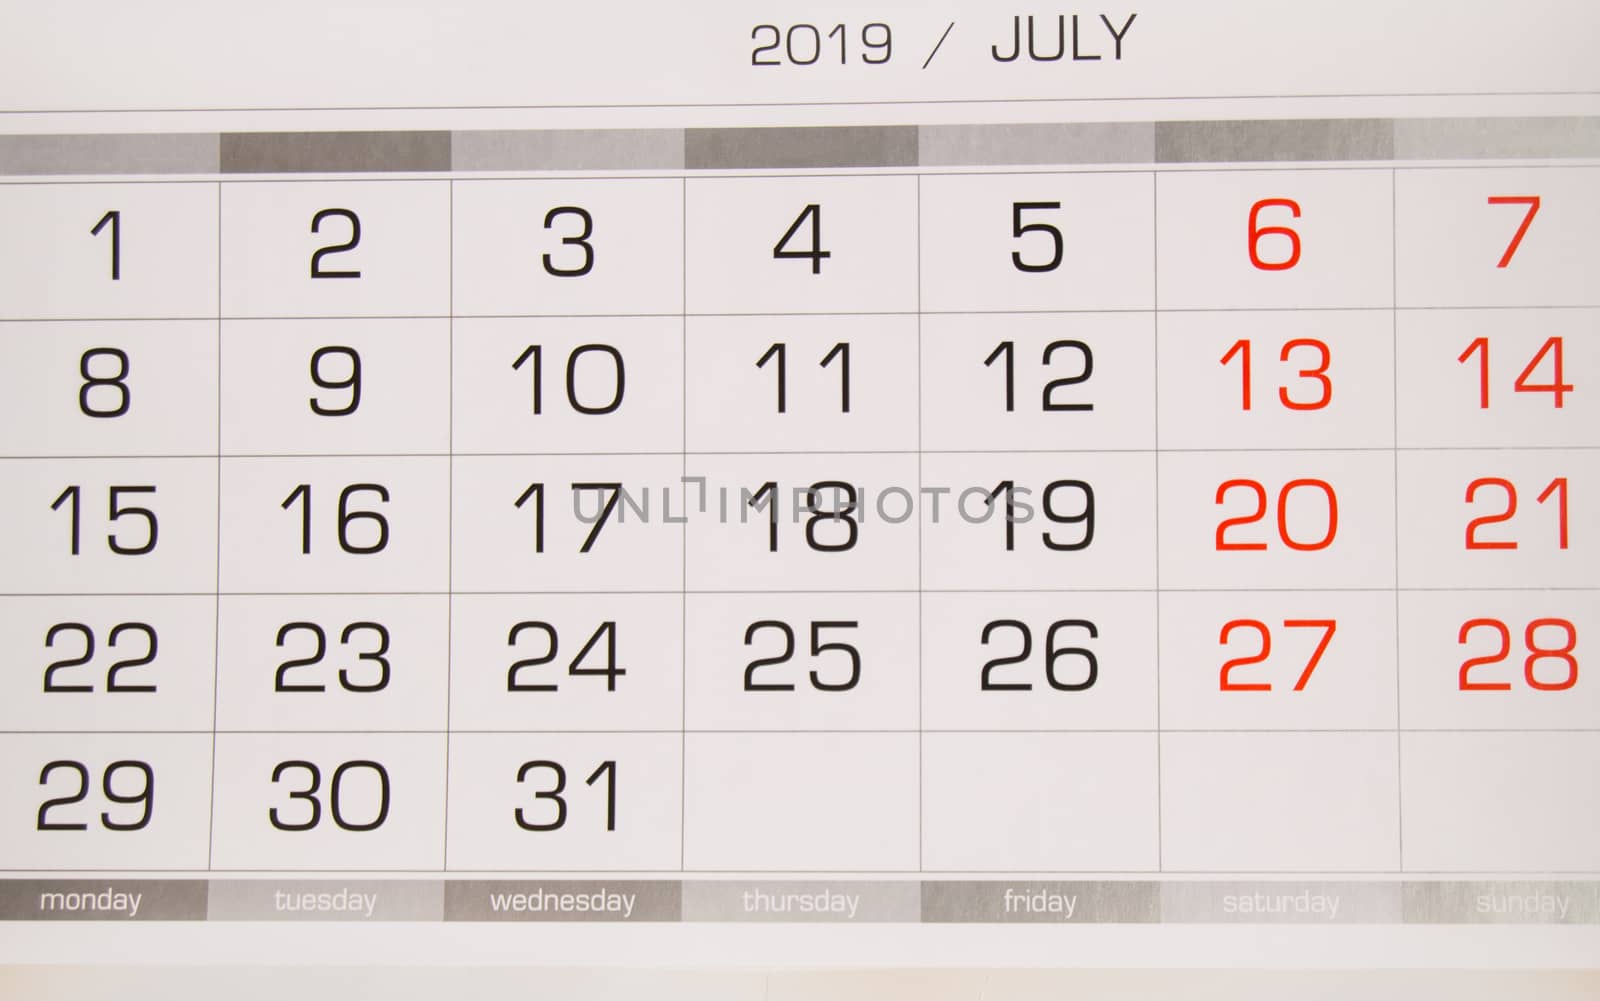 Calendar July 2019 with working days and weekends, close-up top view.